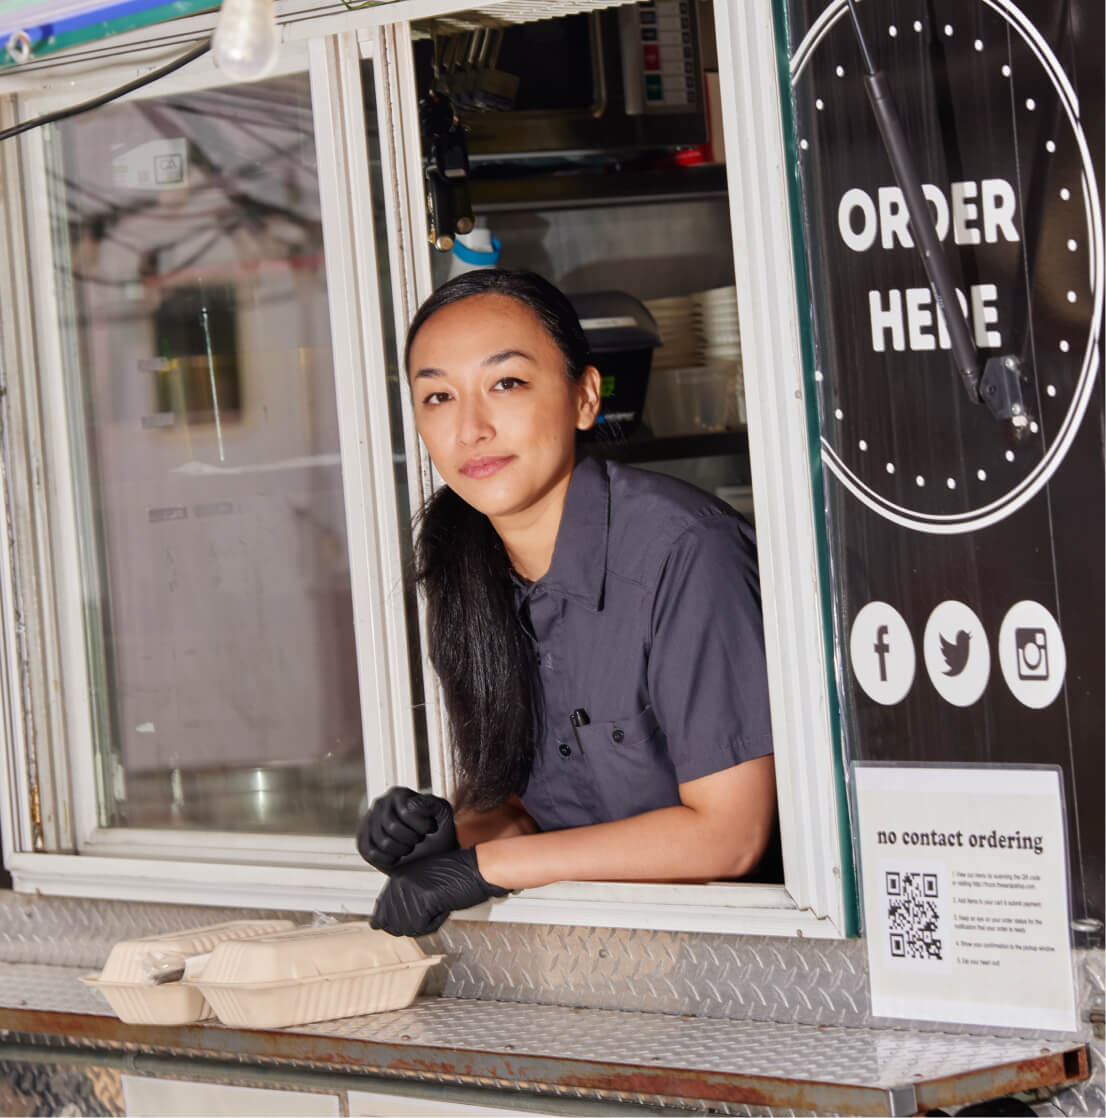 Customized insurance for your food truck